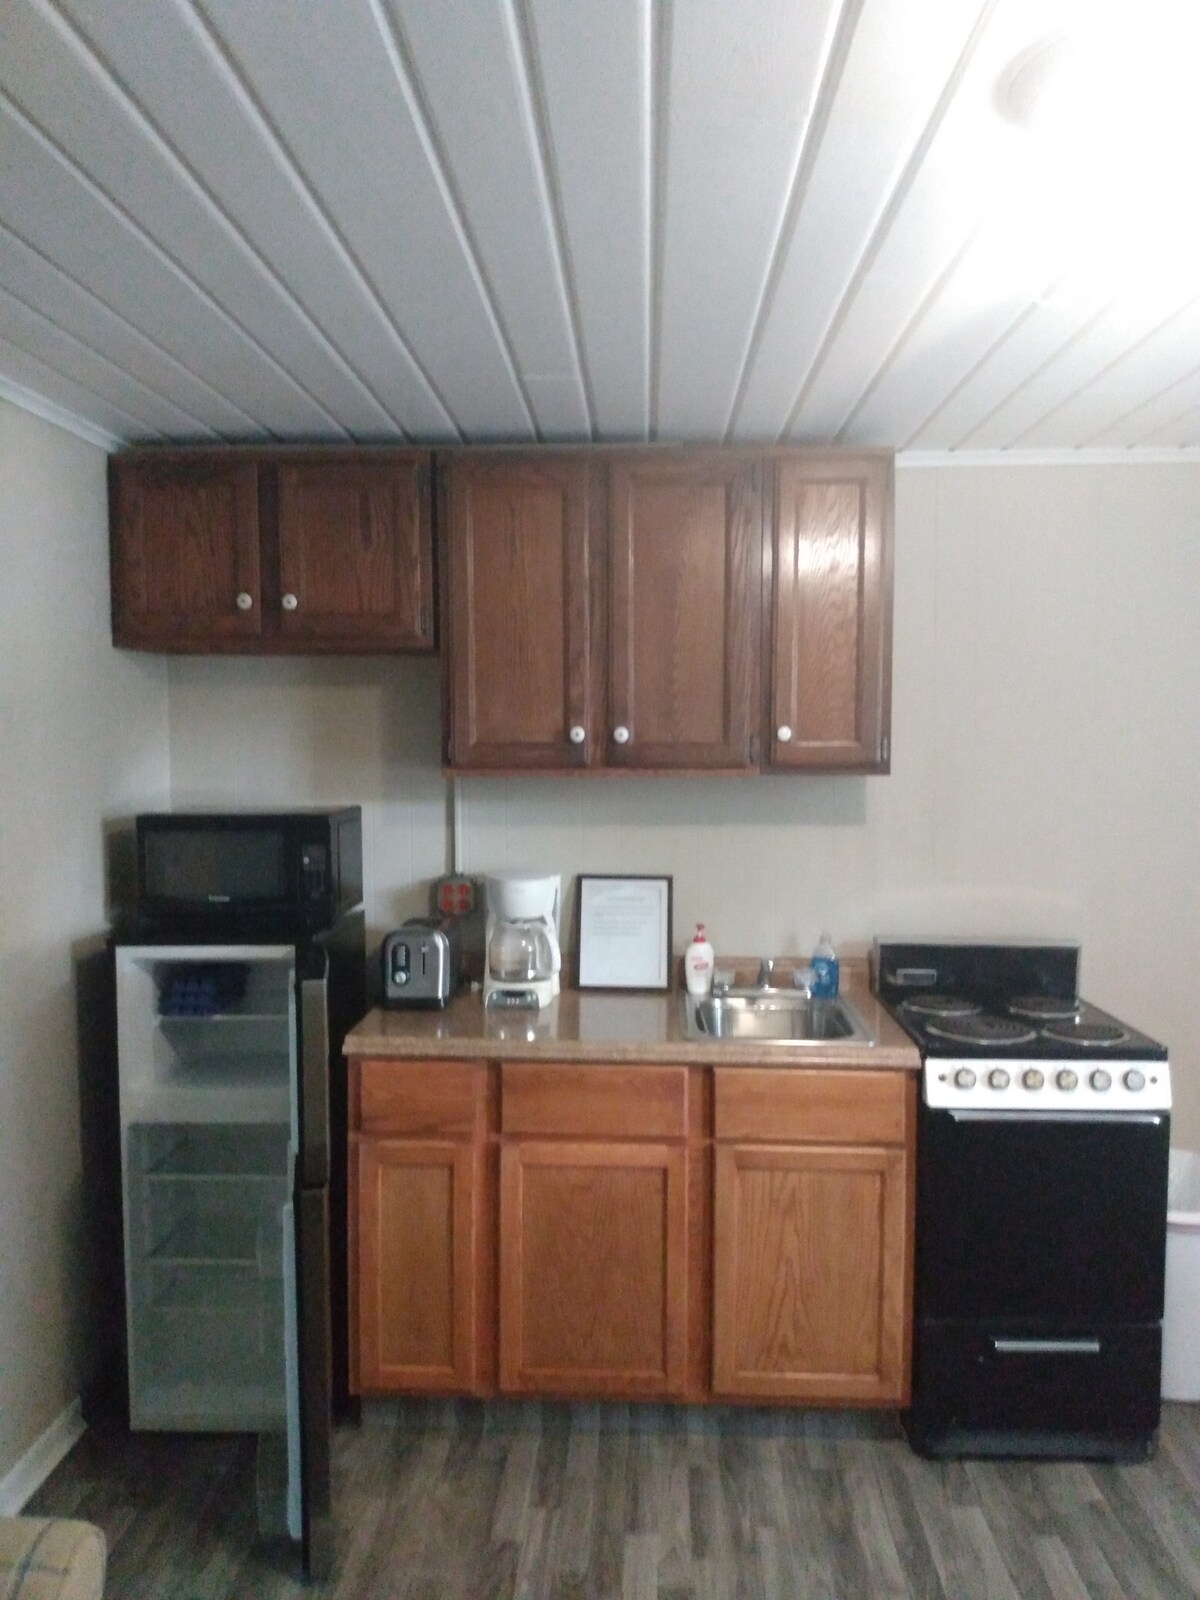 Studio, with full kitchen, close to town